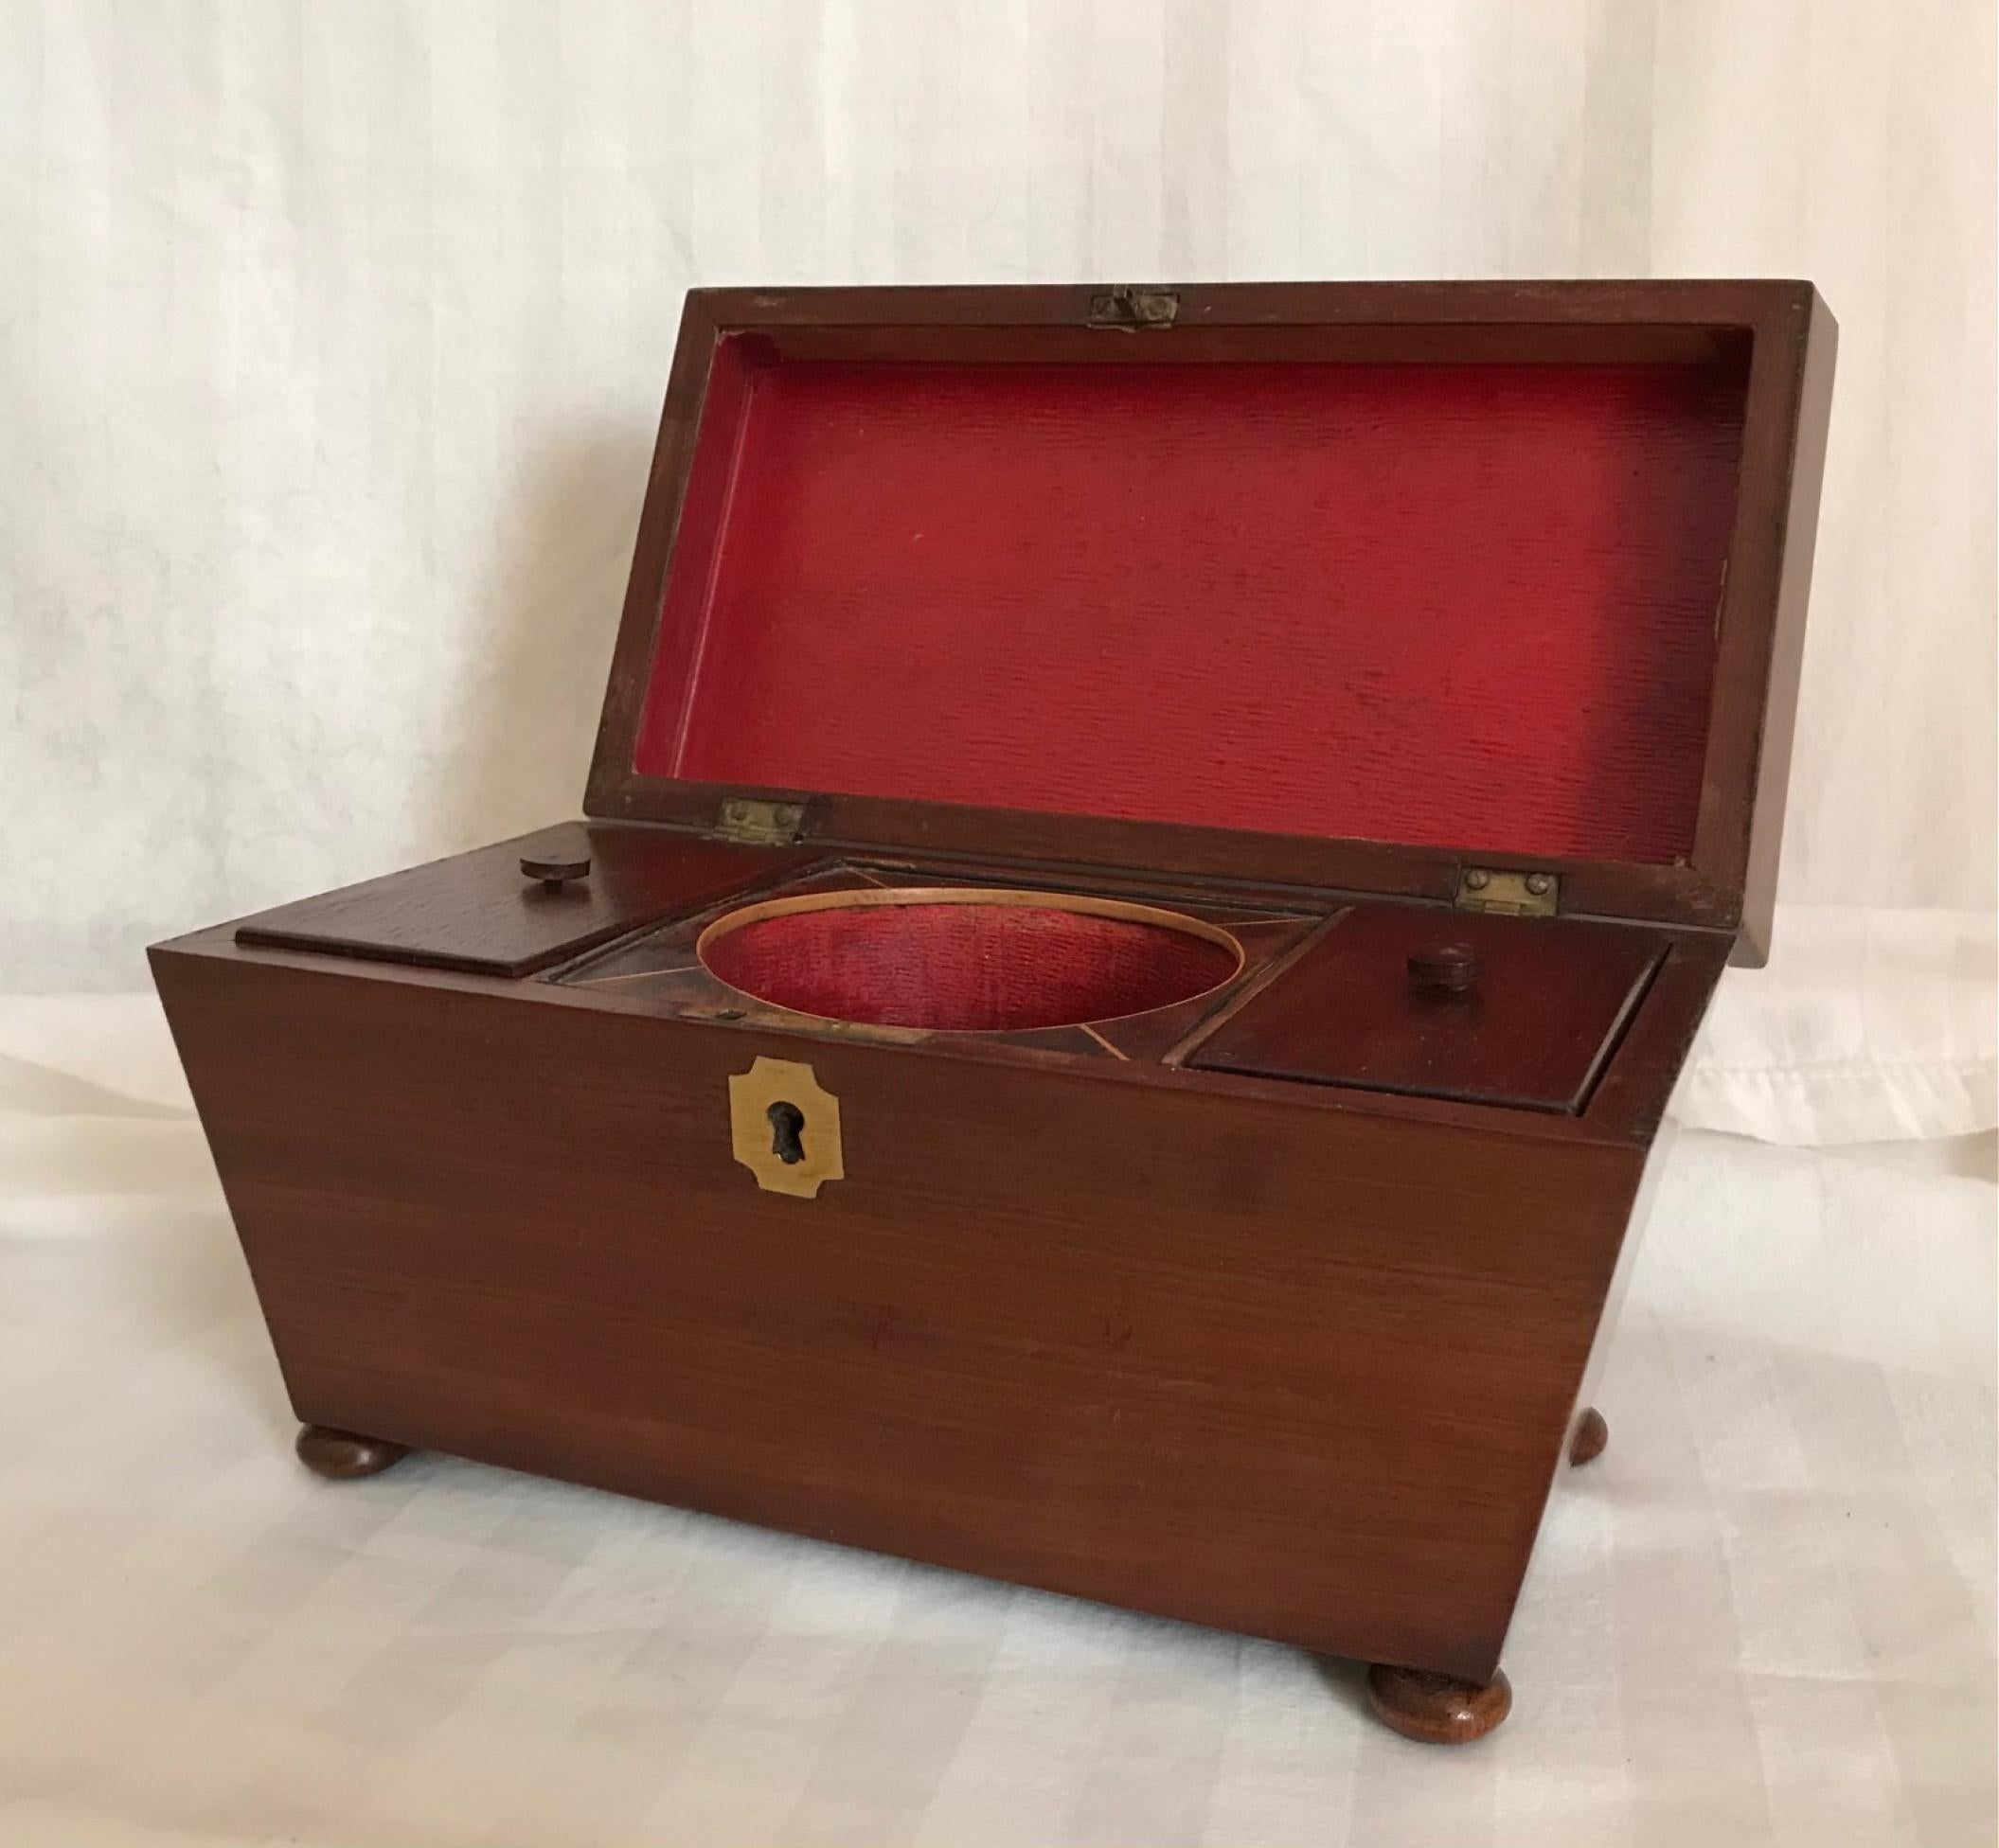 19th century English rosewood tea caddy.

This beautiful rosewood tea caddy has a sarcophagus shaped body and a gentle pyramid shaped lid. The fitted interior is comprised of a well and 2 tea compartments with button knobbed lids. The caddy sits